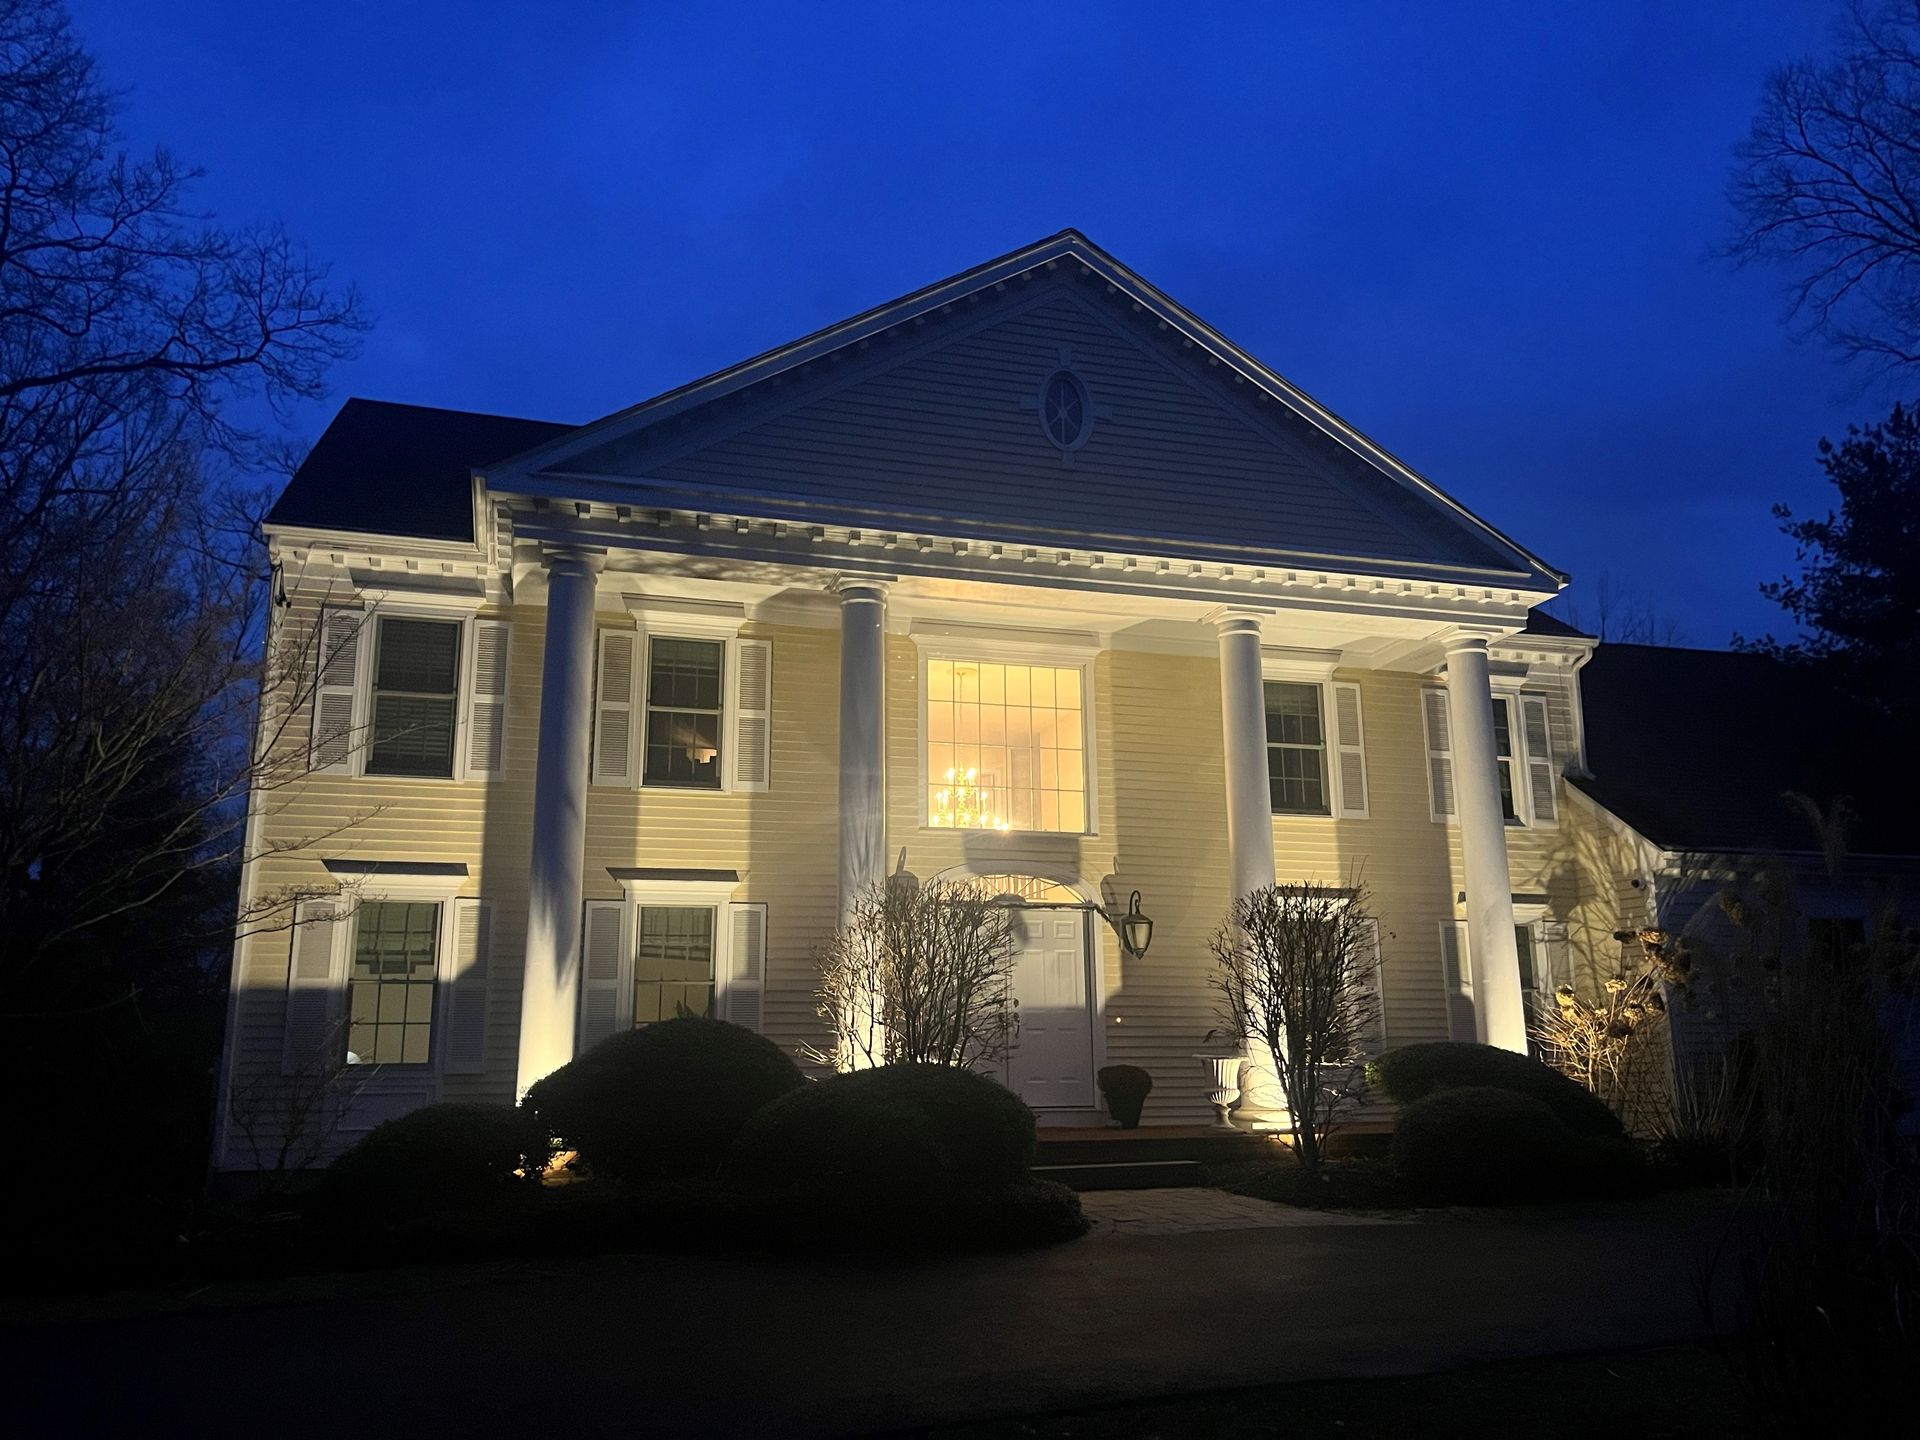 a large house with columns is lit up at night